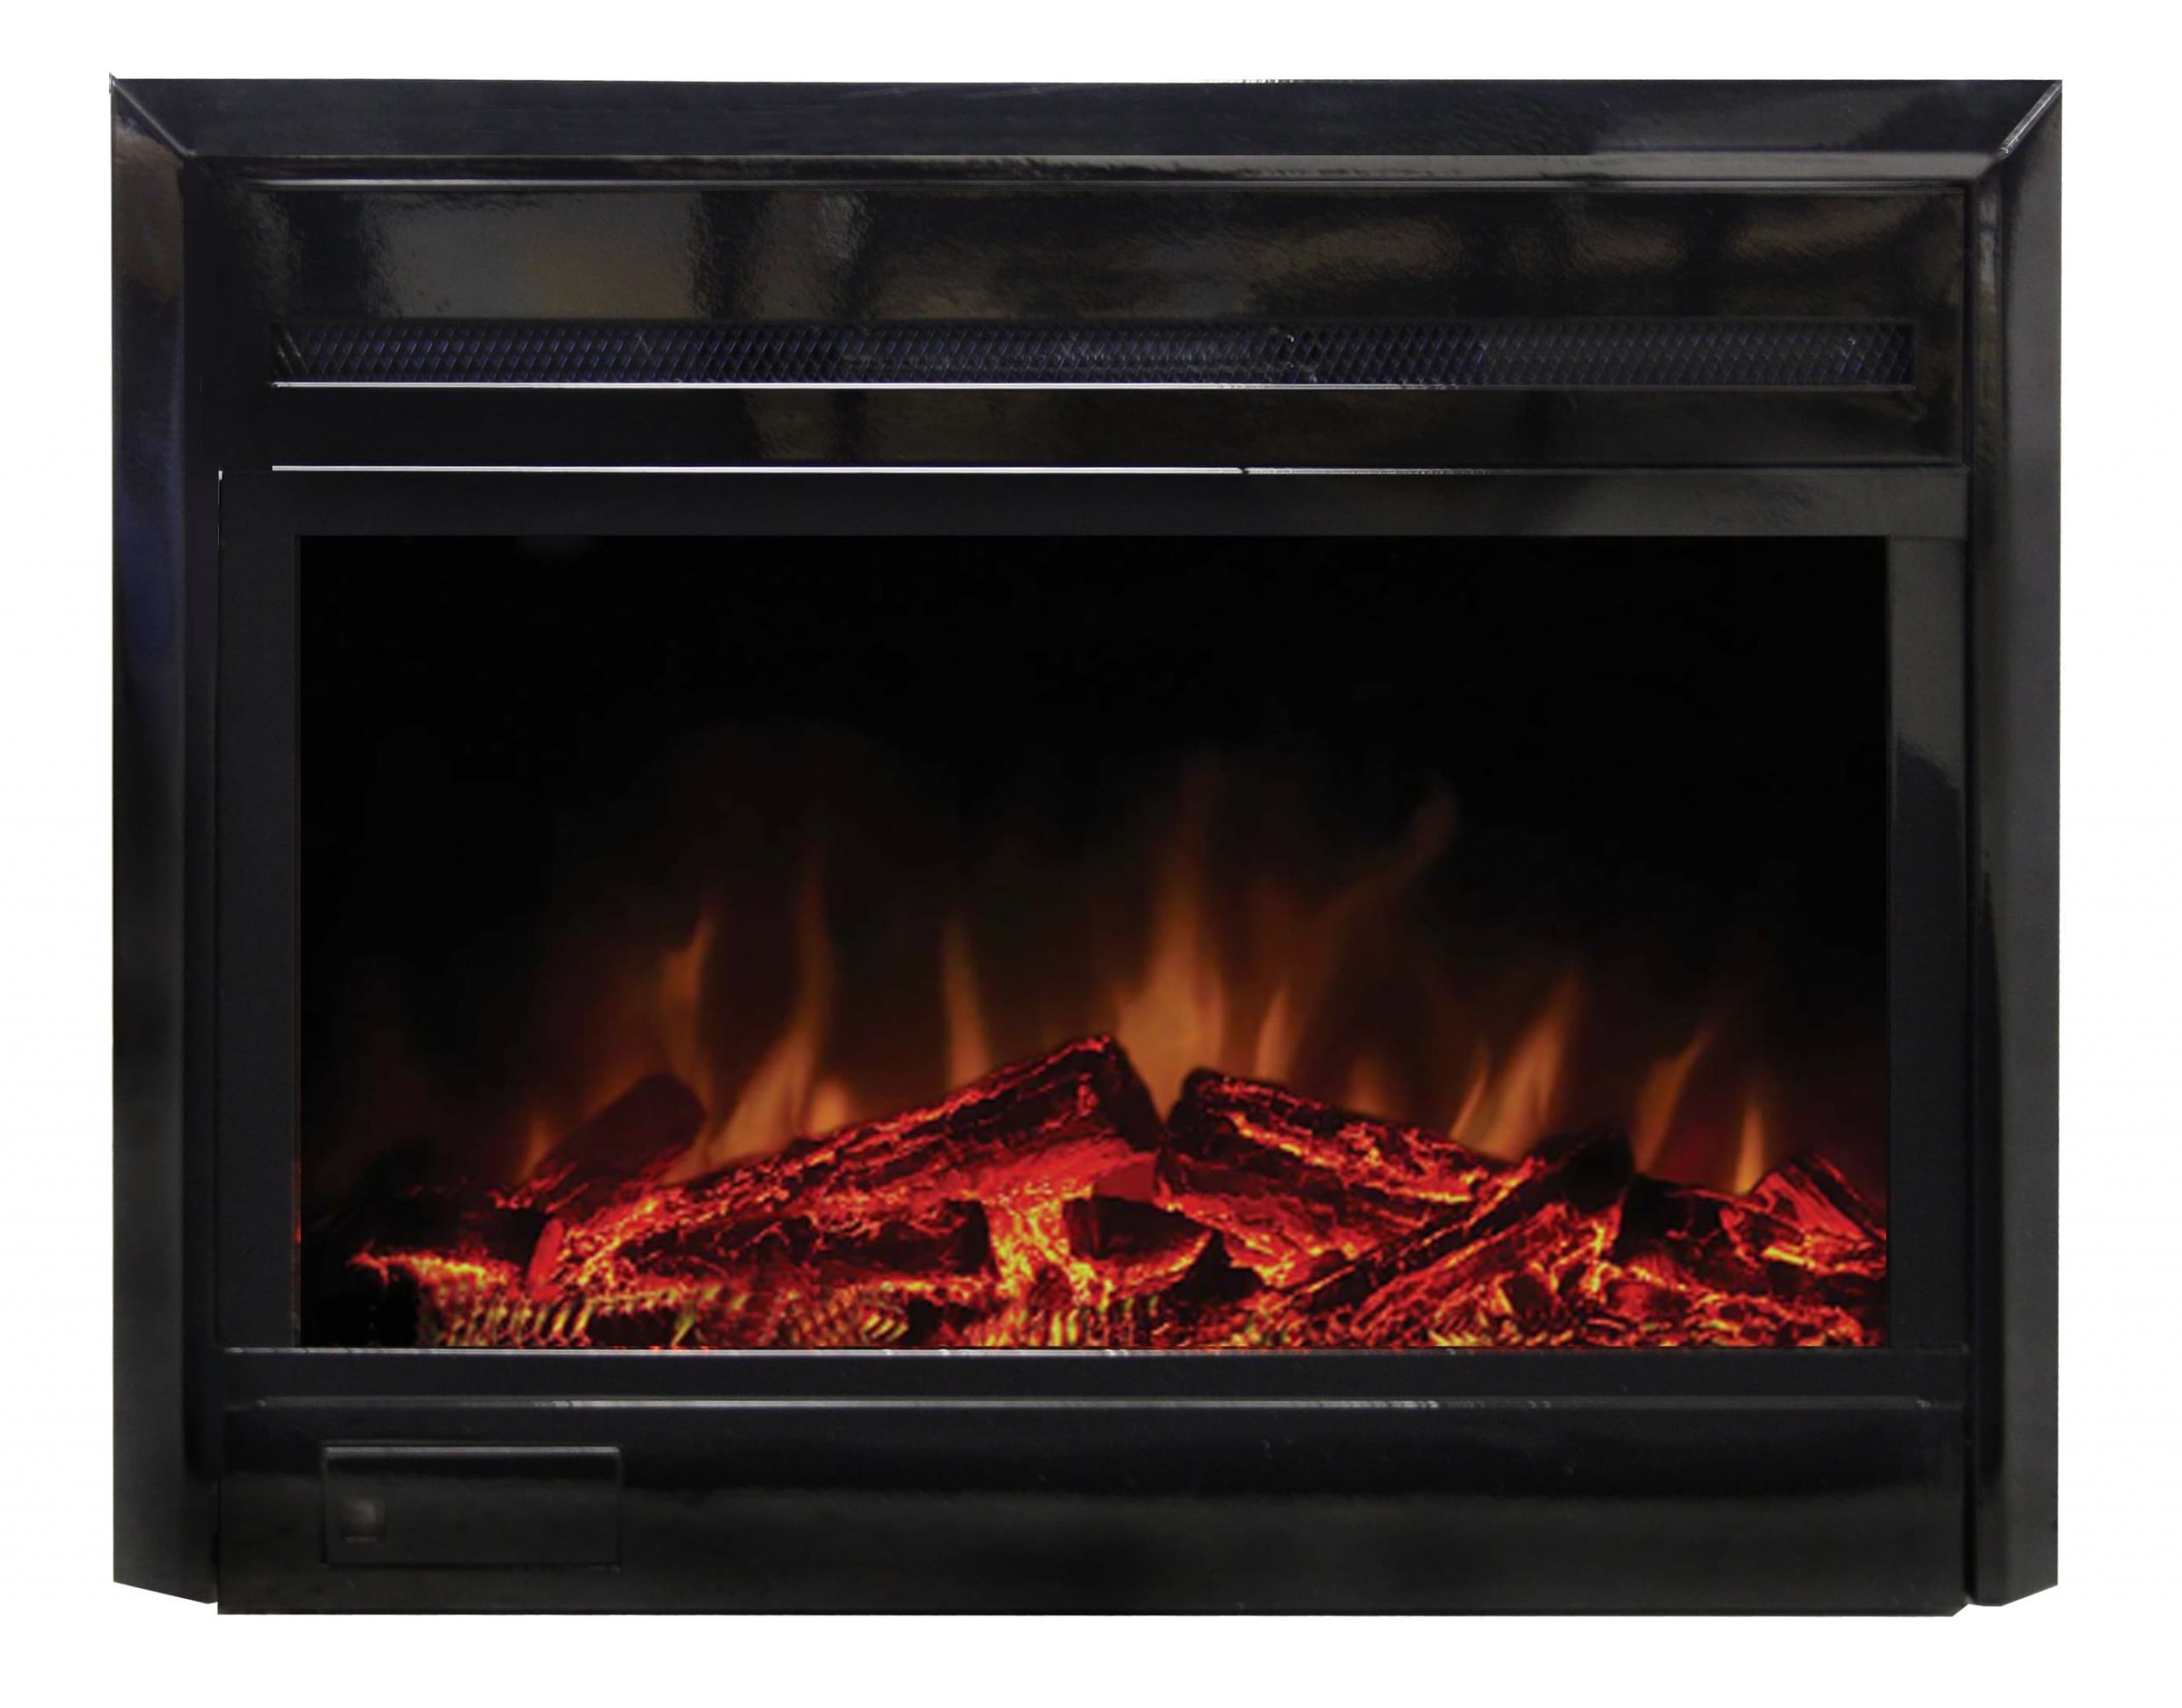 Led Electric Fireplace Insert
 28” Insert With Glossy Trim Kit Now with LED Electric